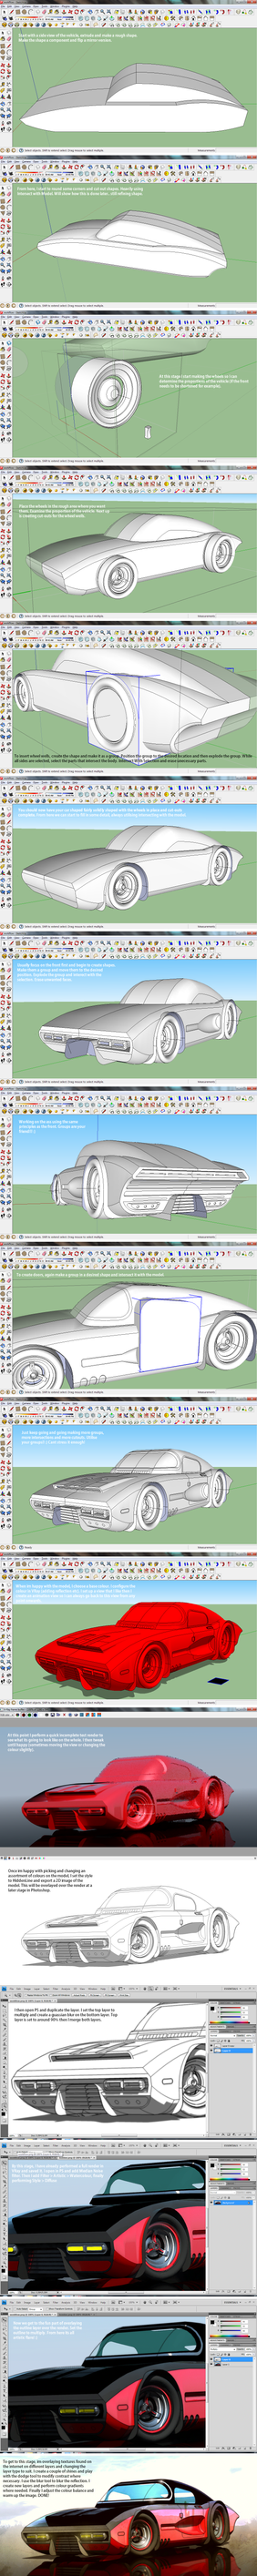 Bomber coupe SKETCHUP WORKFLOW - start to finish